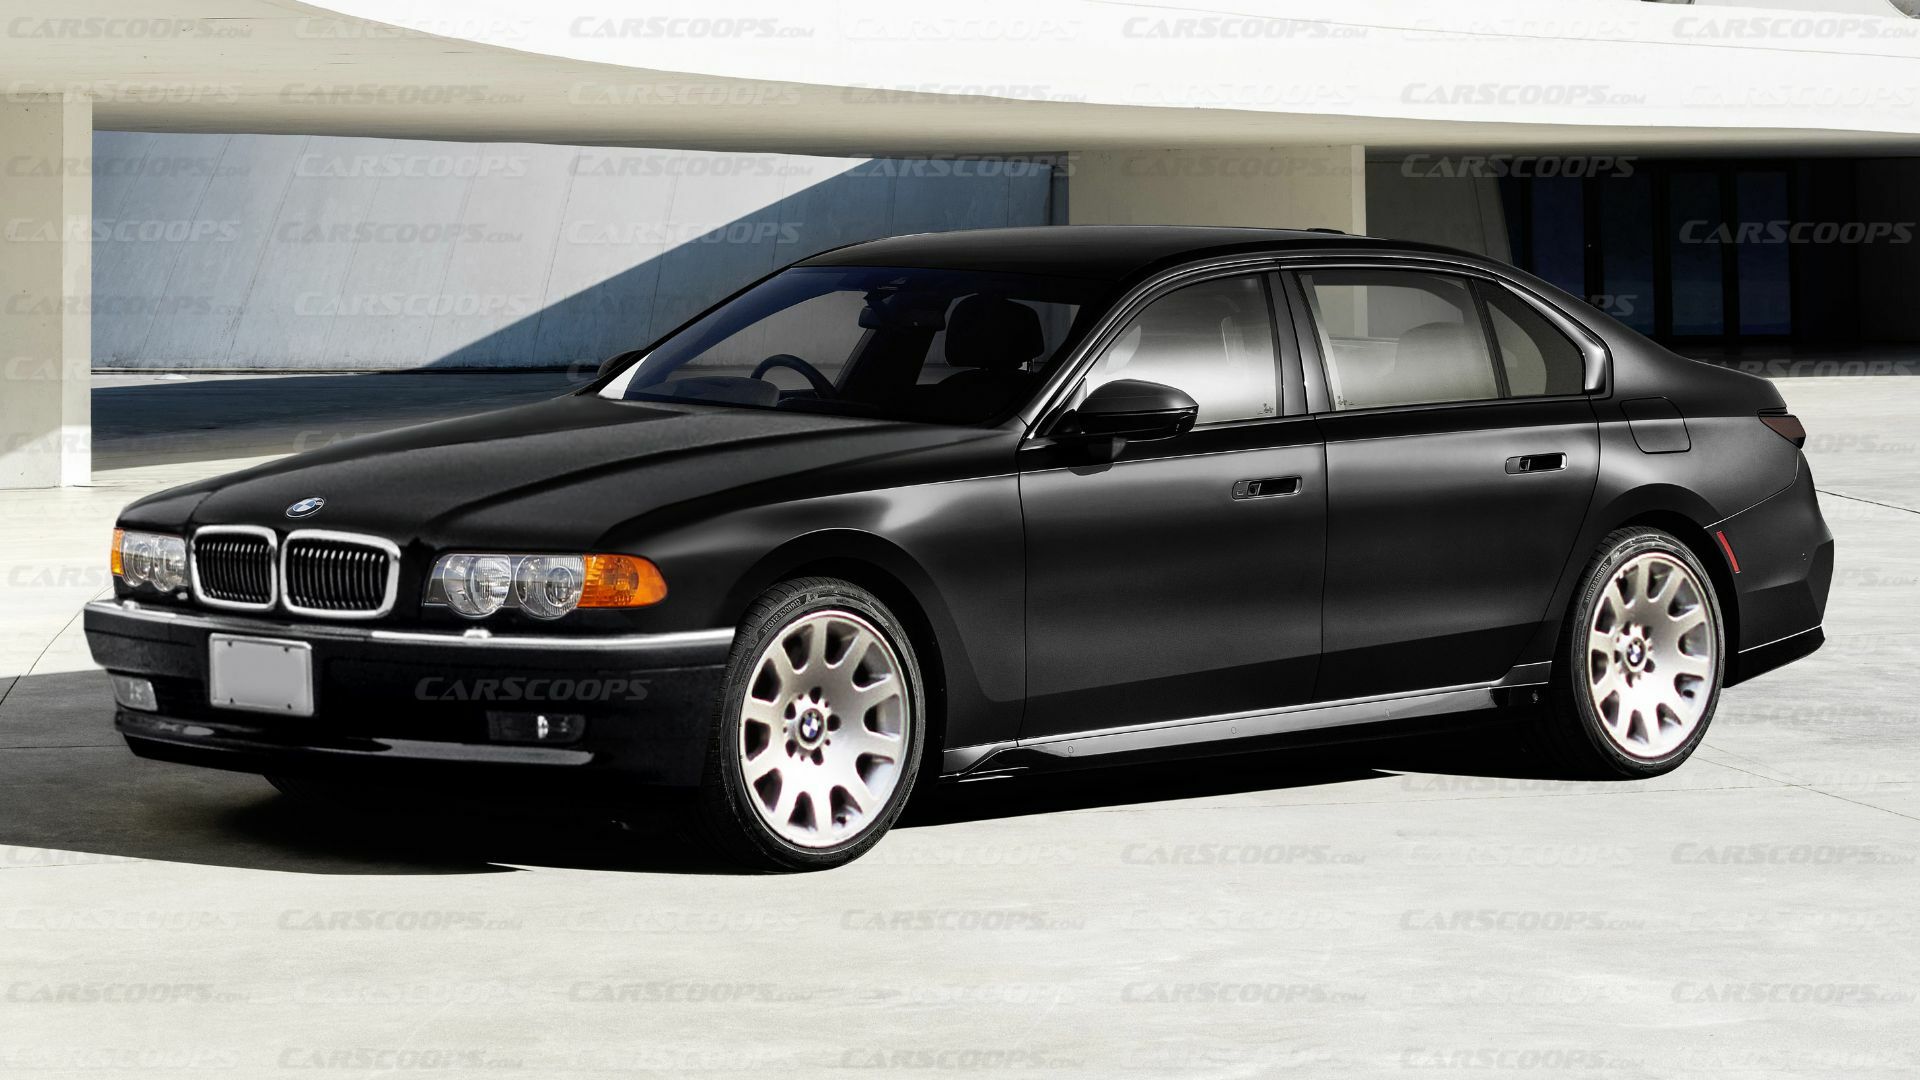 The E38 Generation BMW 7 Series Is The Luxury BMW The World Needs Today -  Here's Why! - Dyler